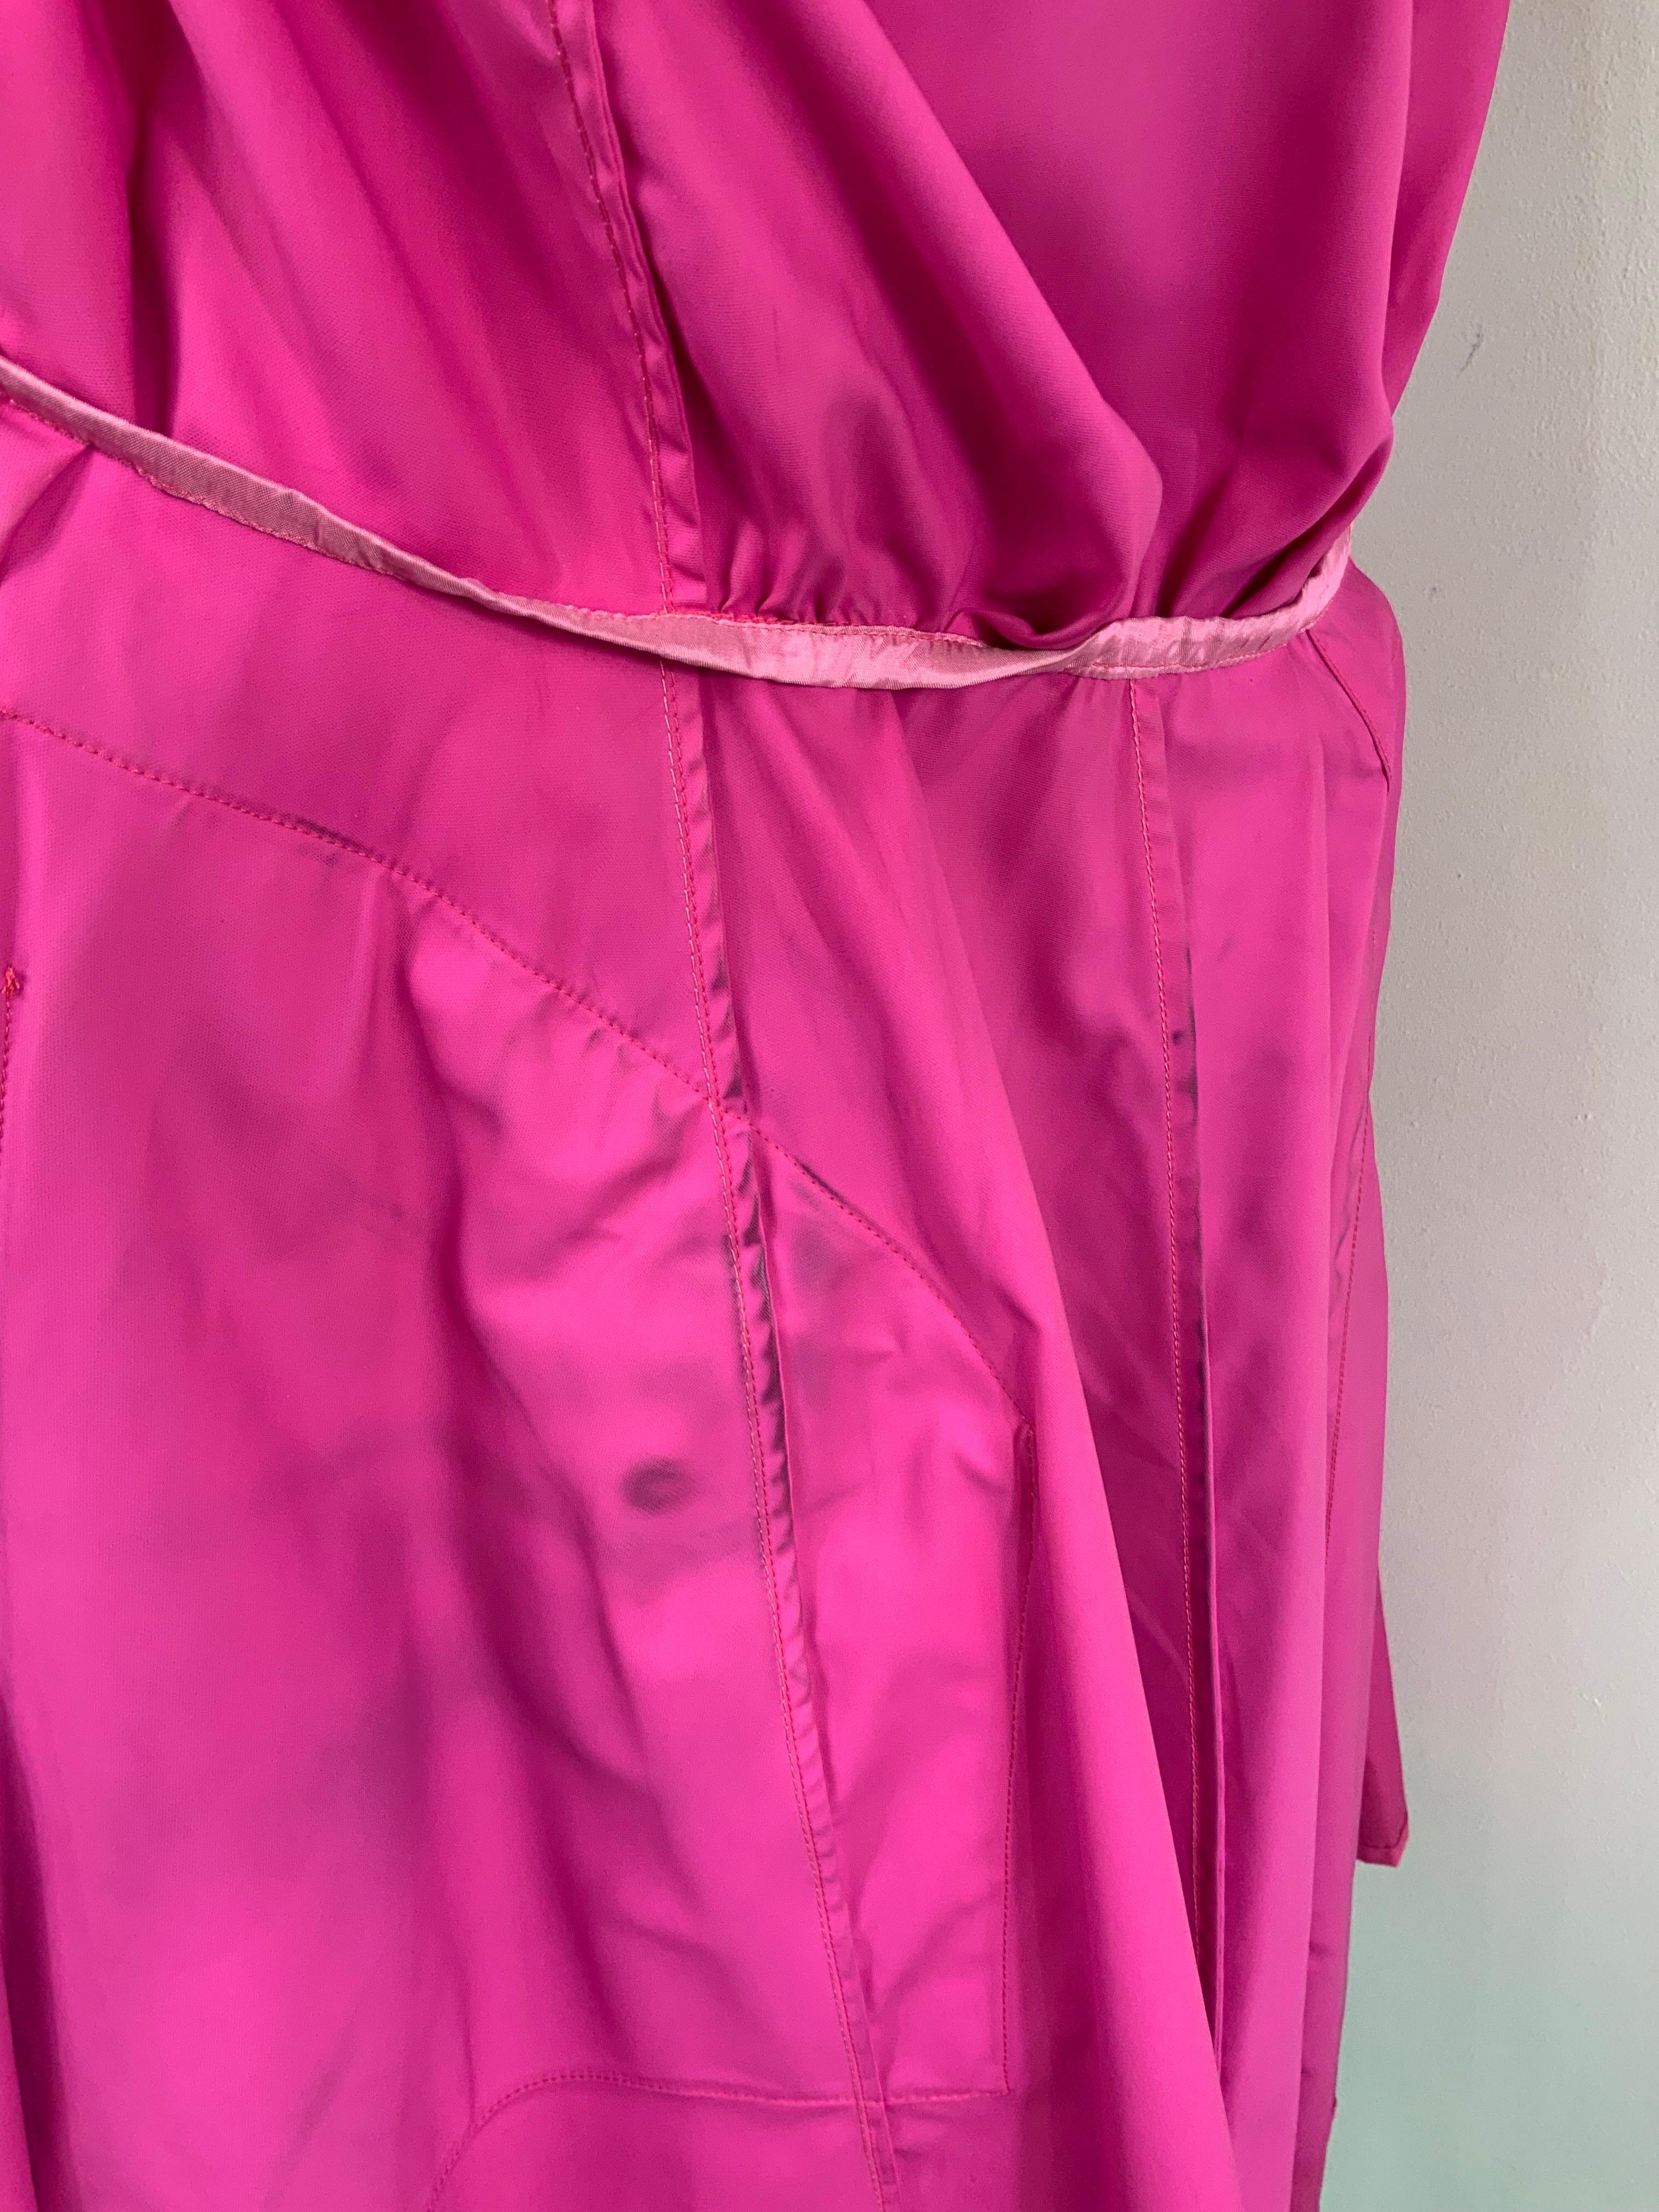 Thierry Mugler fucsia vintage trench  For Sale 1